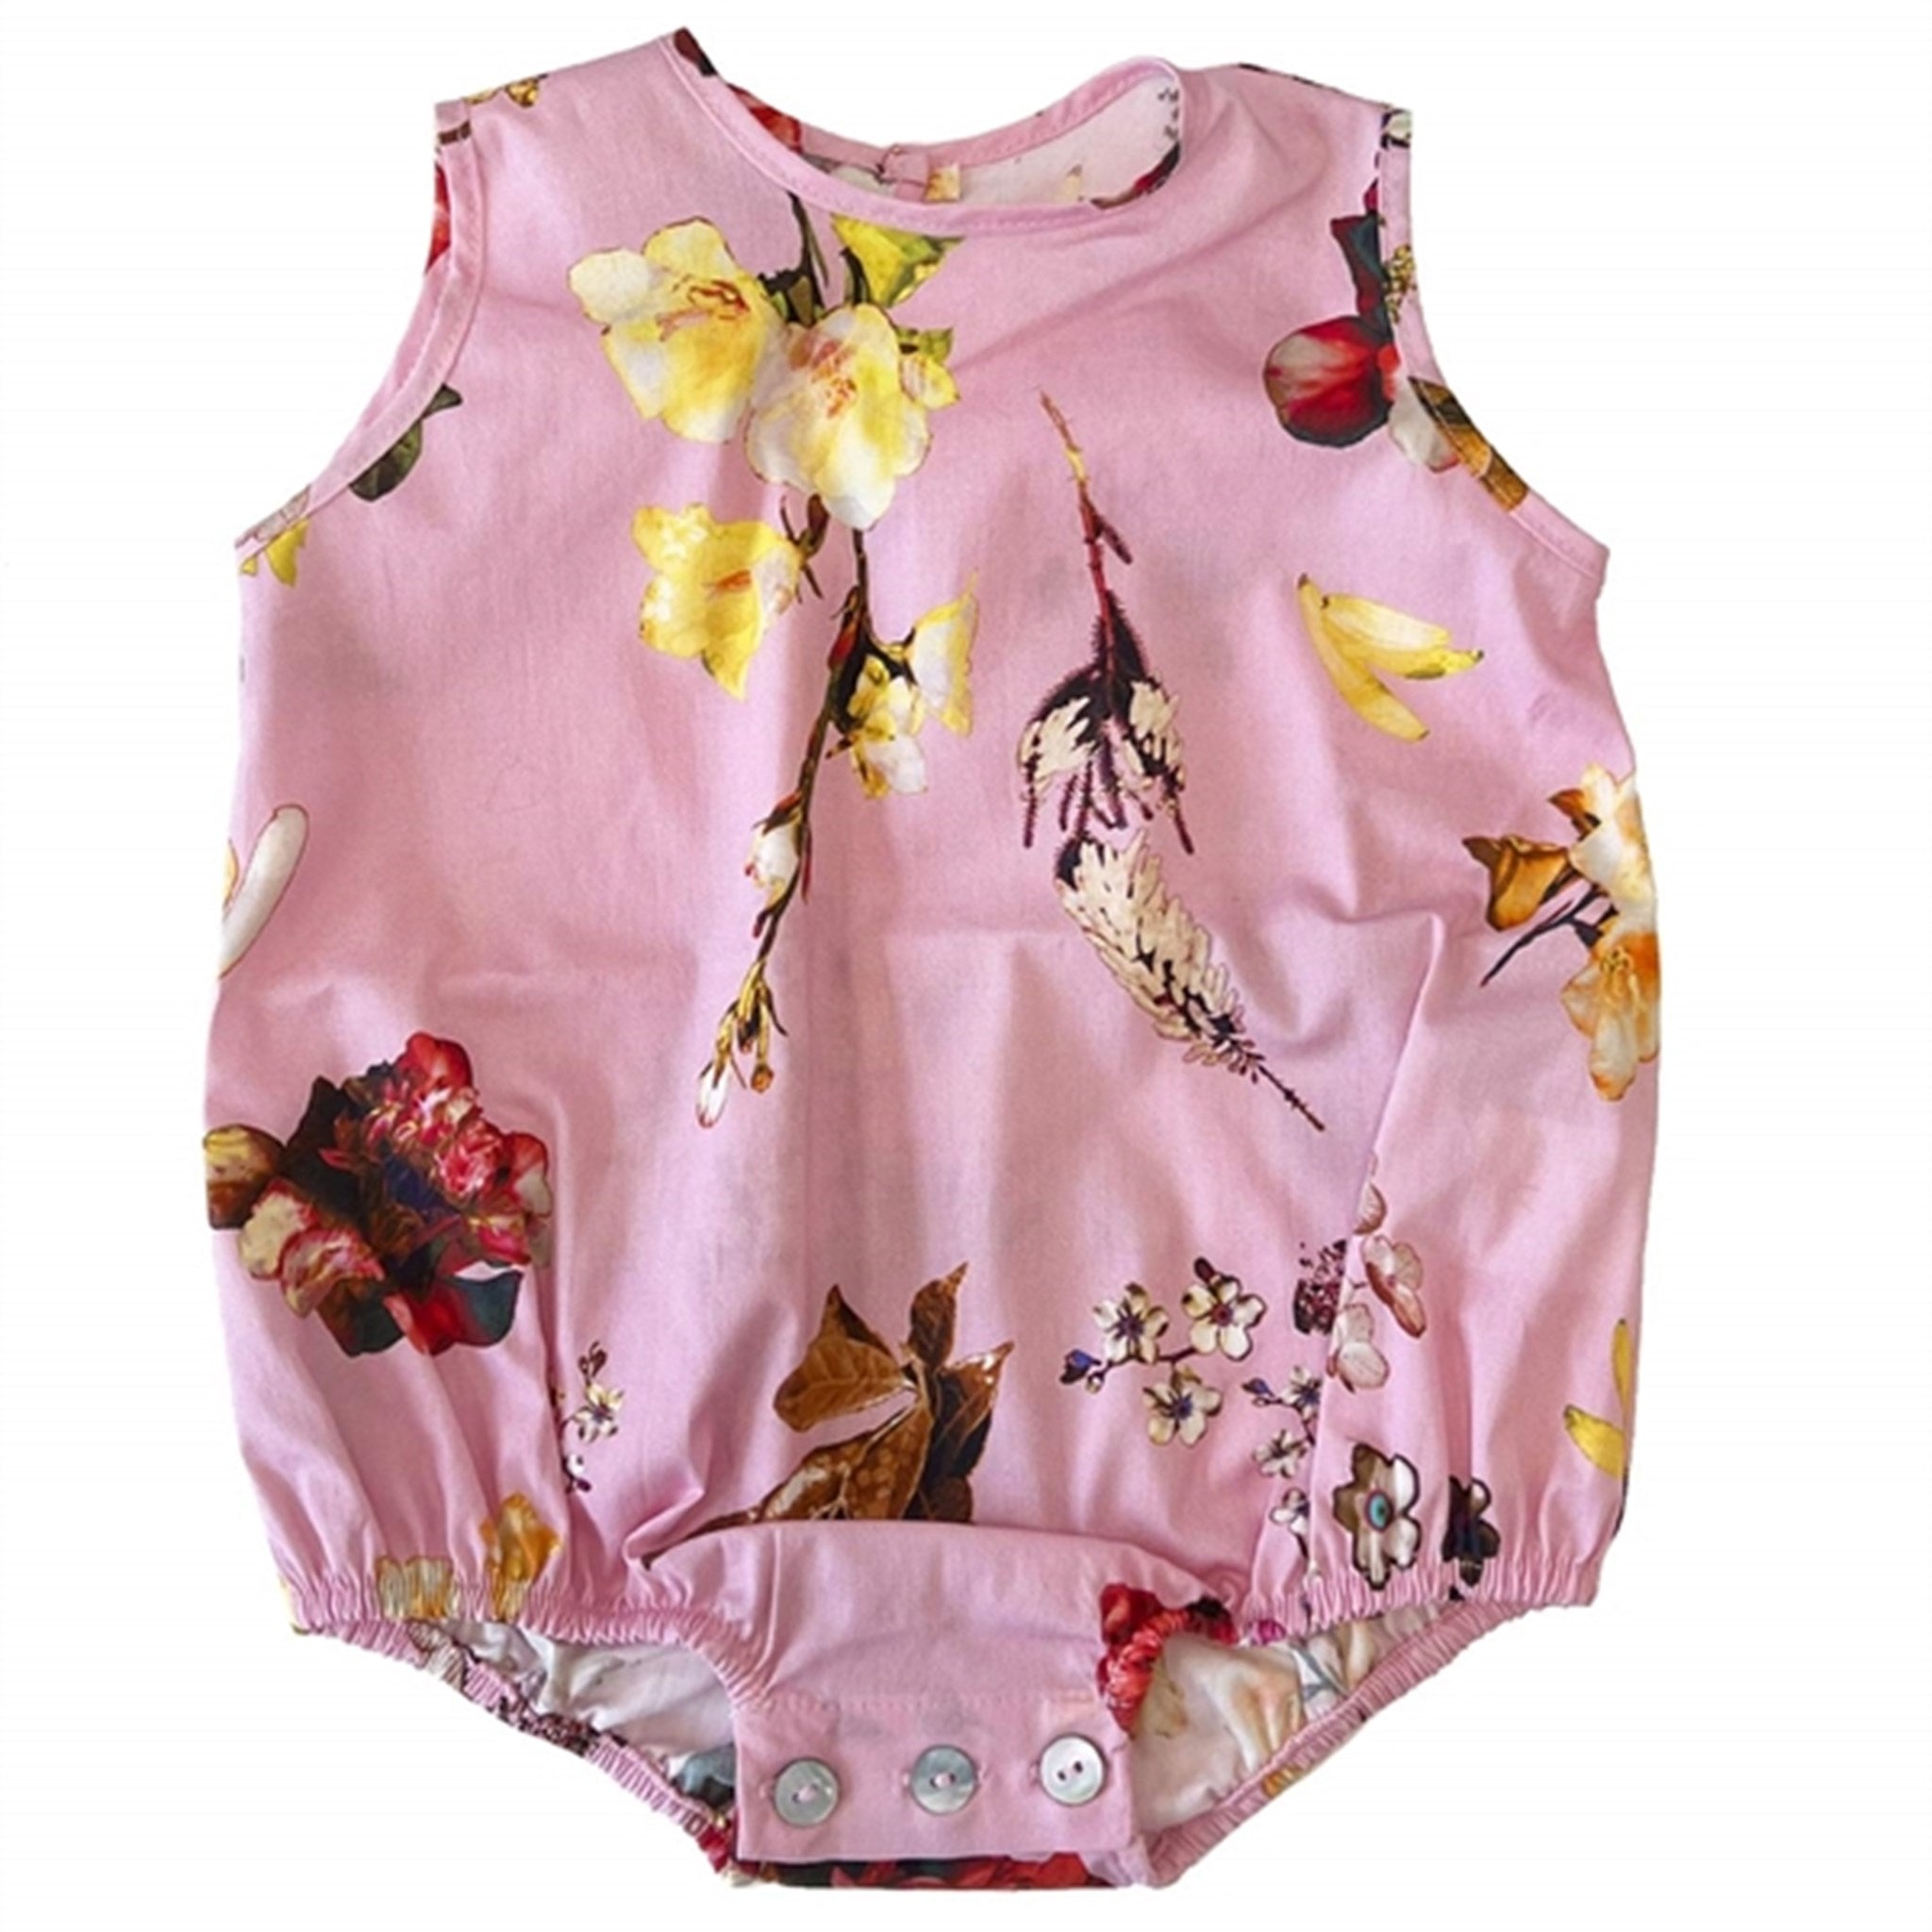 Christina Rohde 812 Baby Romper Pink Floral